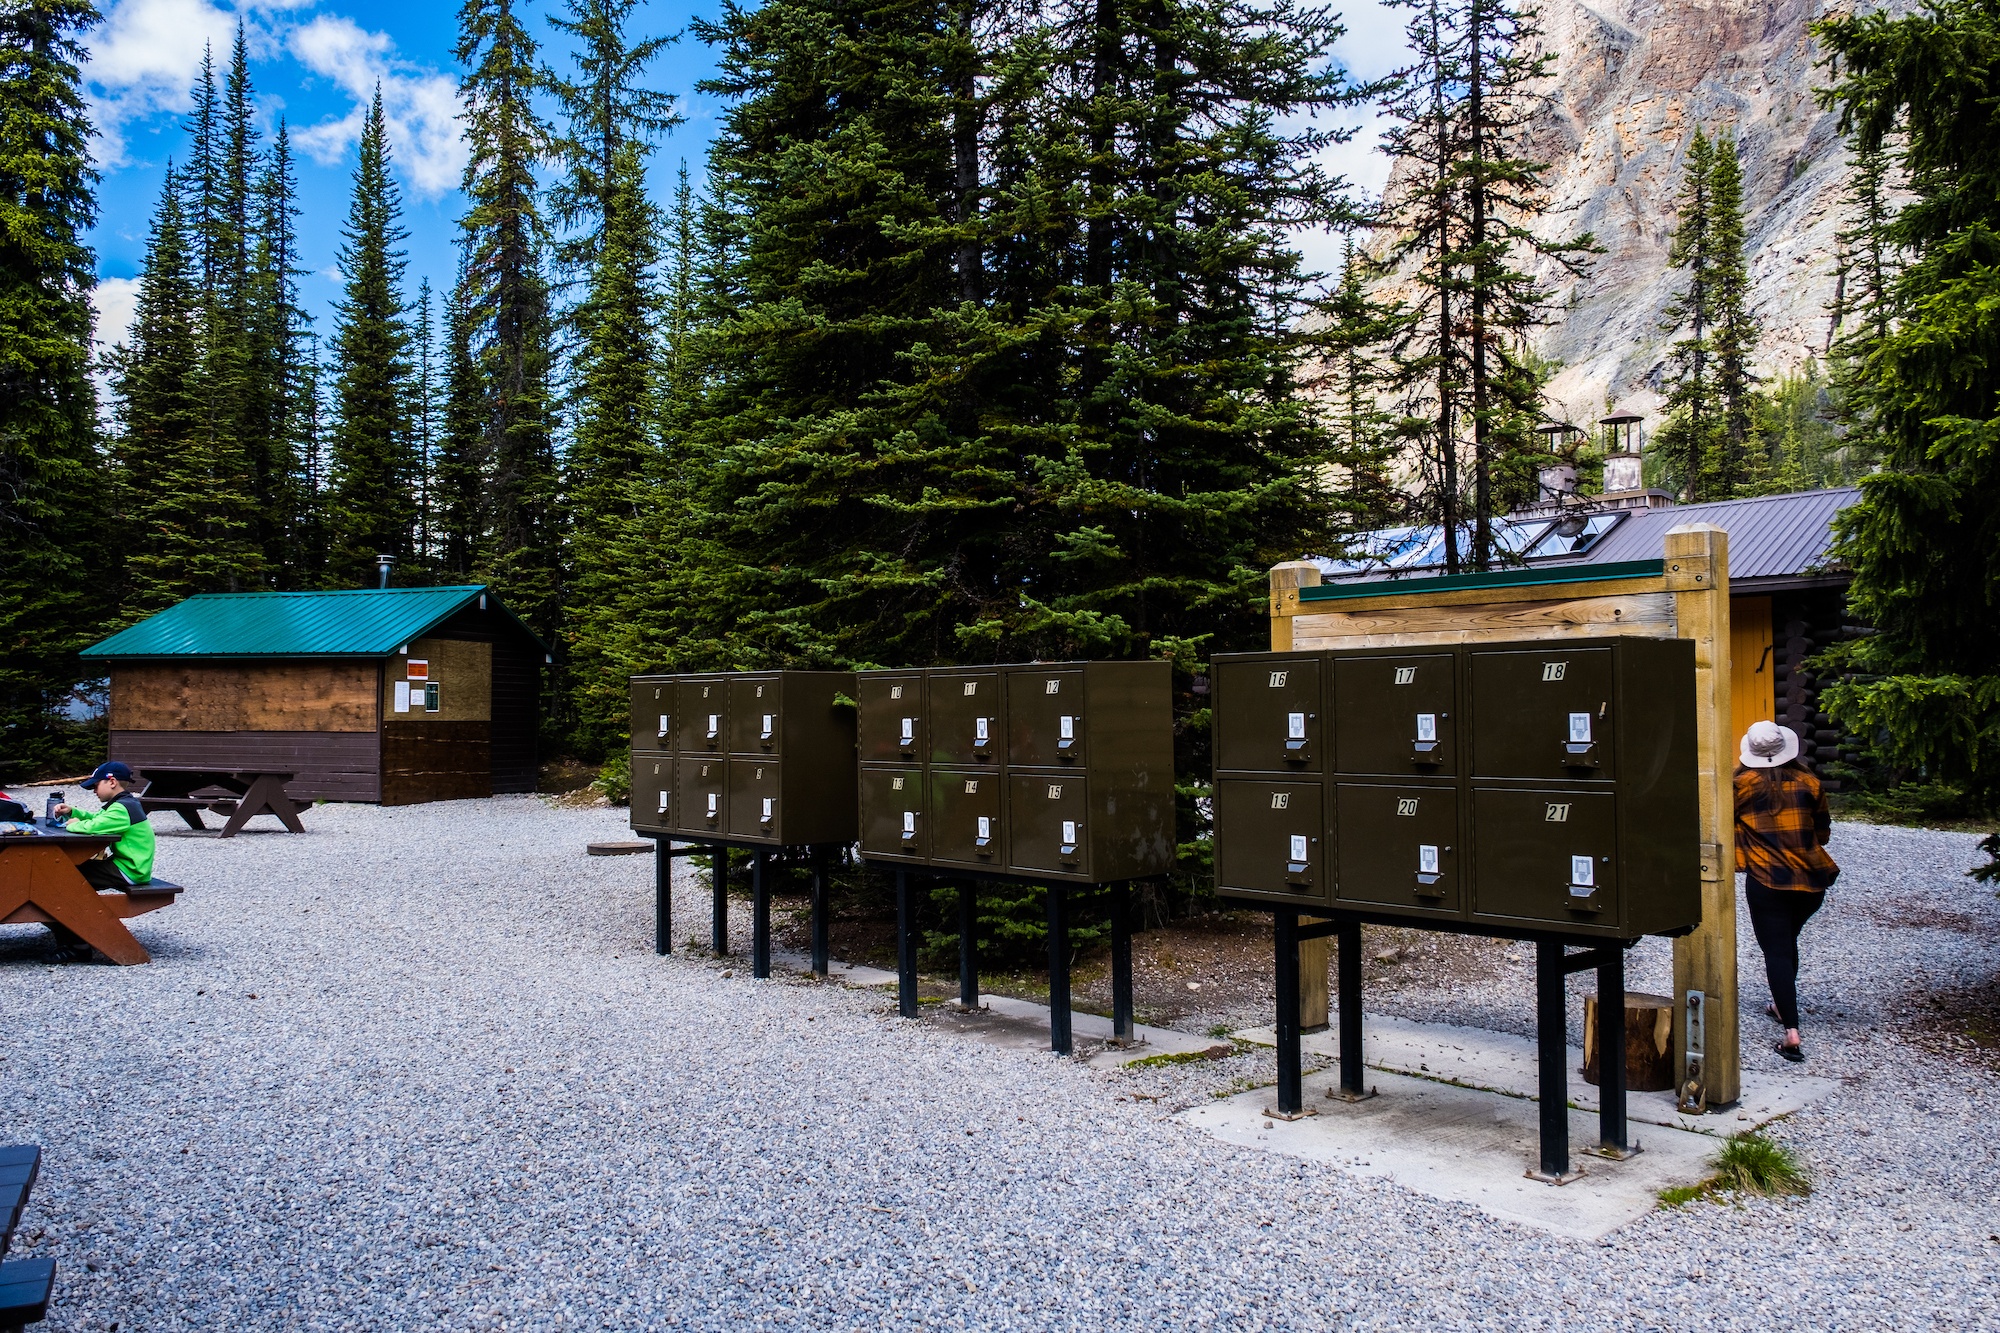 Food Lockers At A Campsite In Banff